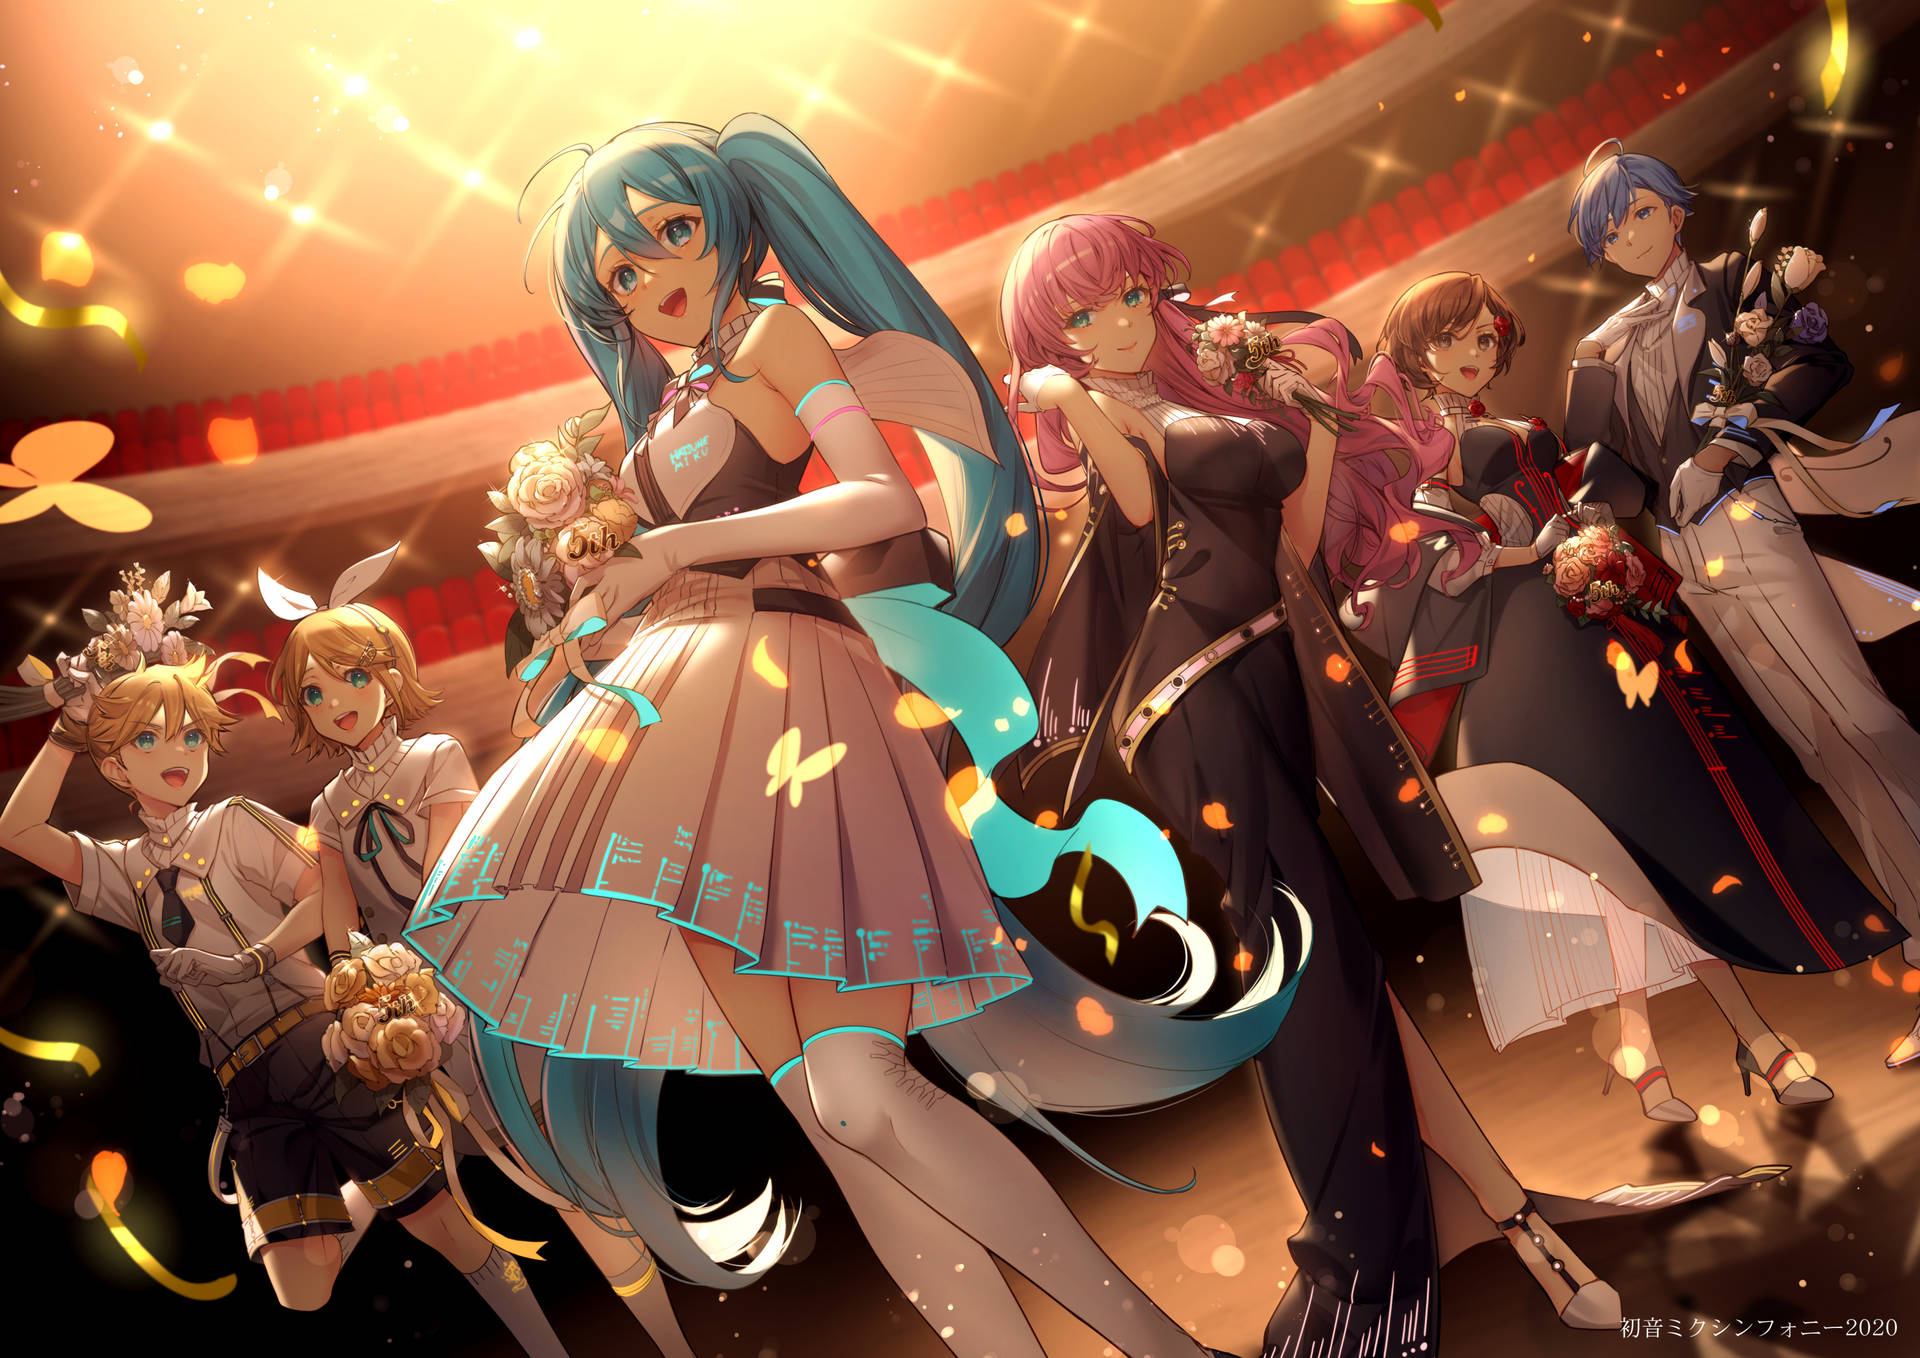 Enjoying The Music With Vocaloid Background